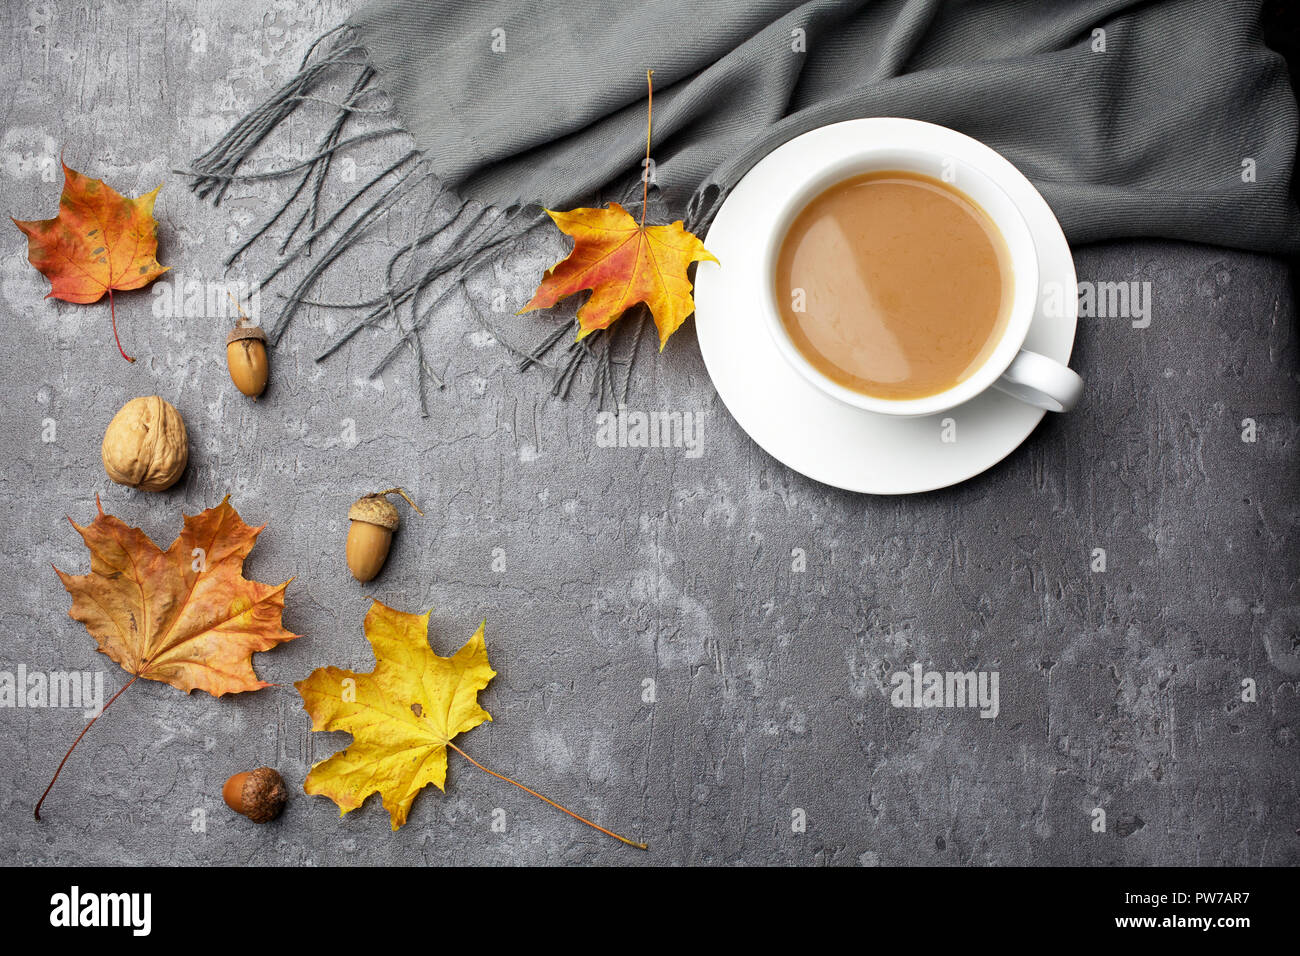 Autumn composition. Cup of coffee, blanket, autumn leaves on grey background. Flat lay. Stock Photo